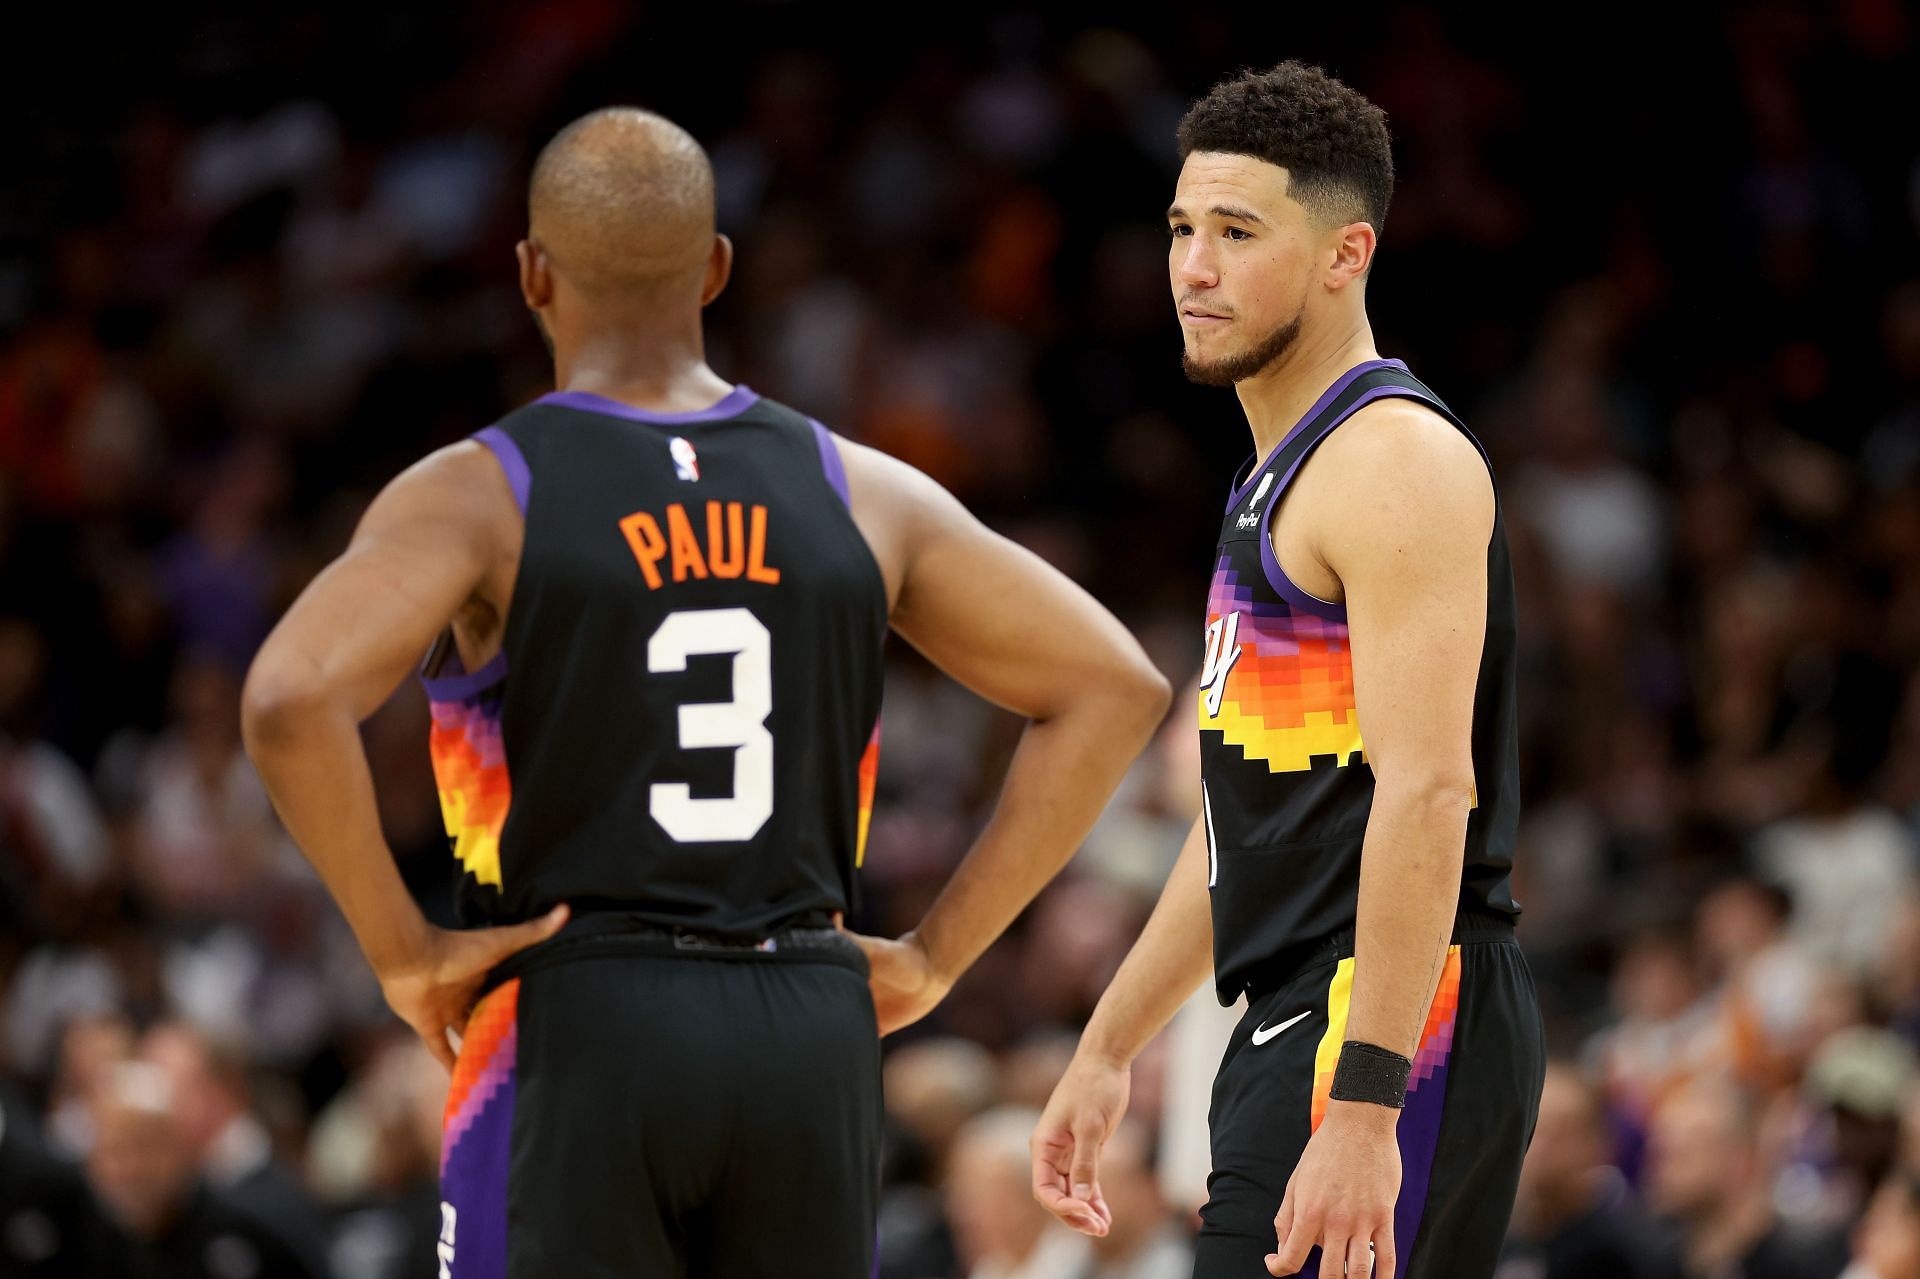 Devin Booker and Chris Paul of the Phoenix Suns had an epic meltdown in Game 7.